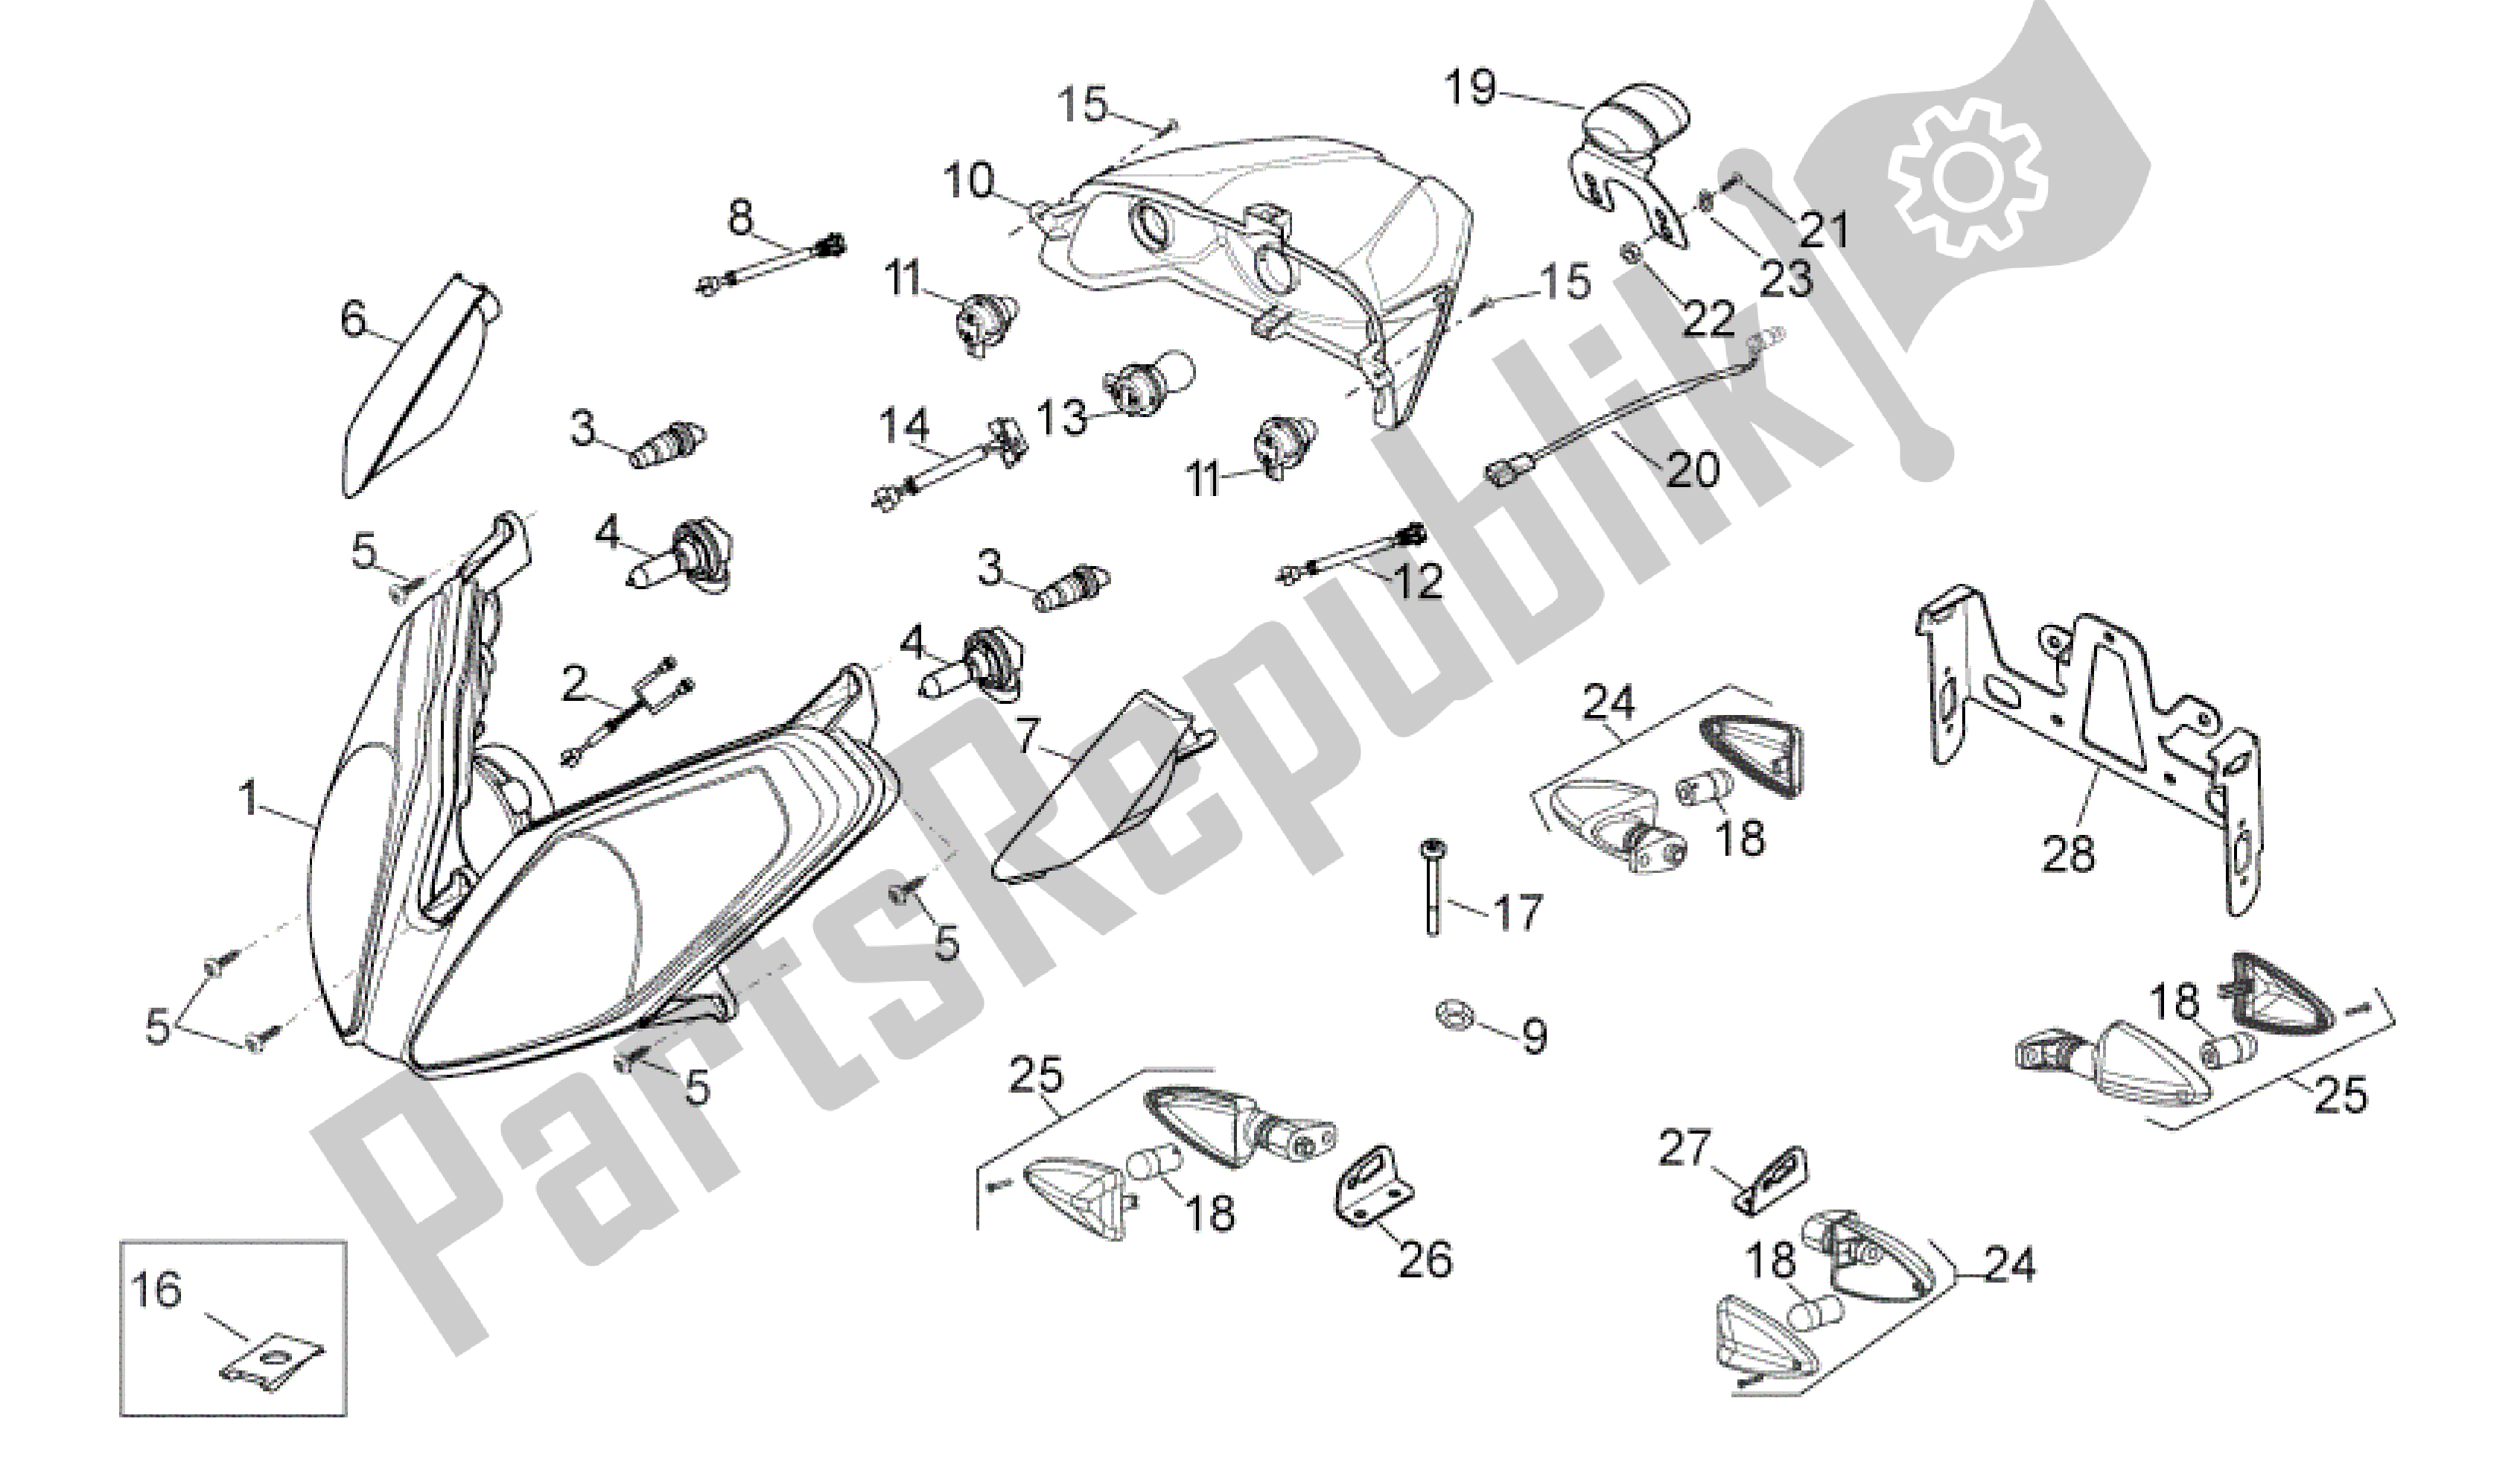 All parts for the Lights of the Aprilia Sport City 50 2011